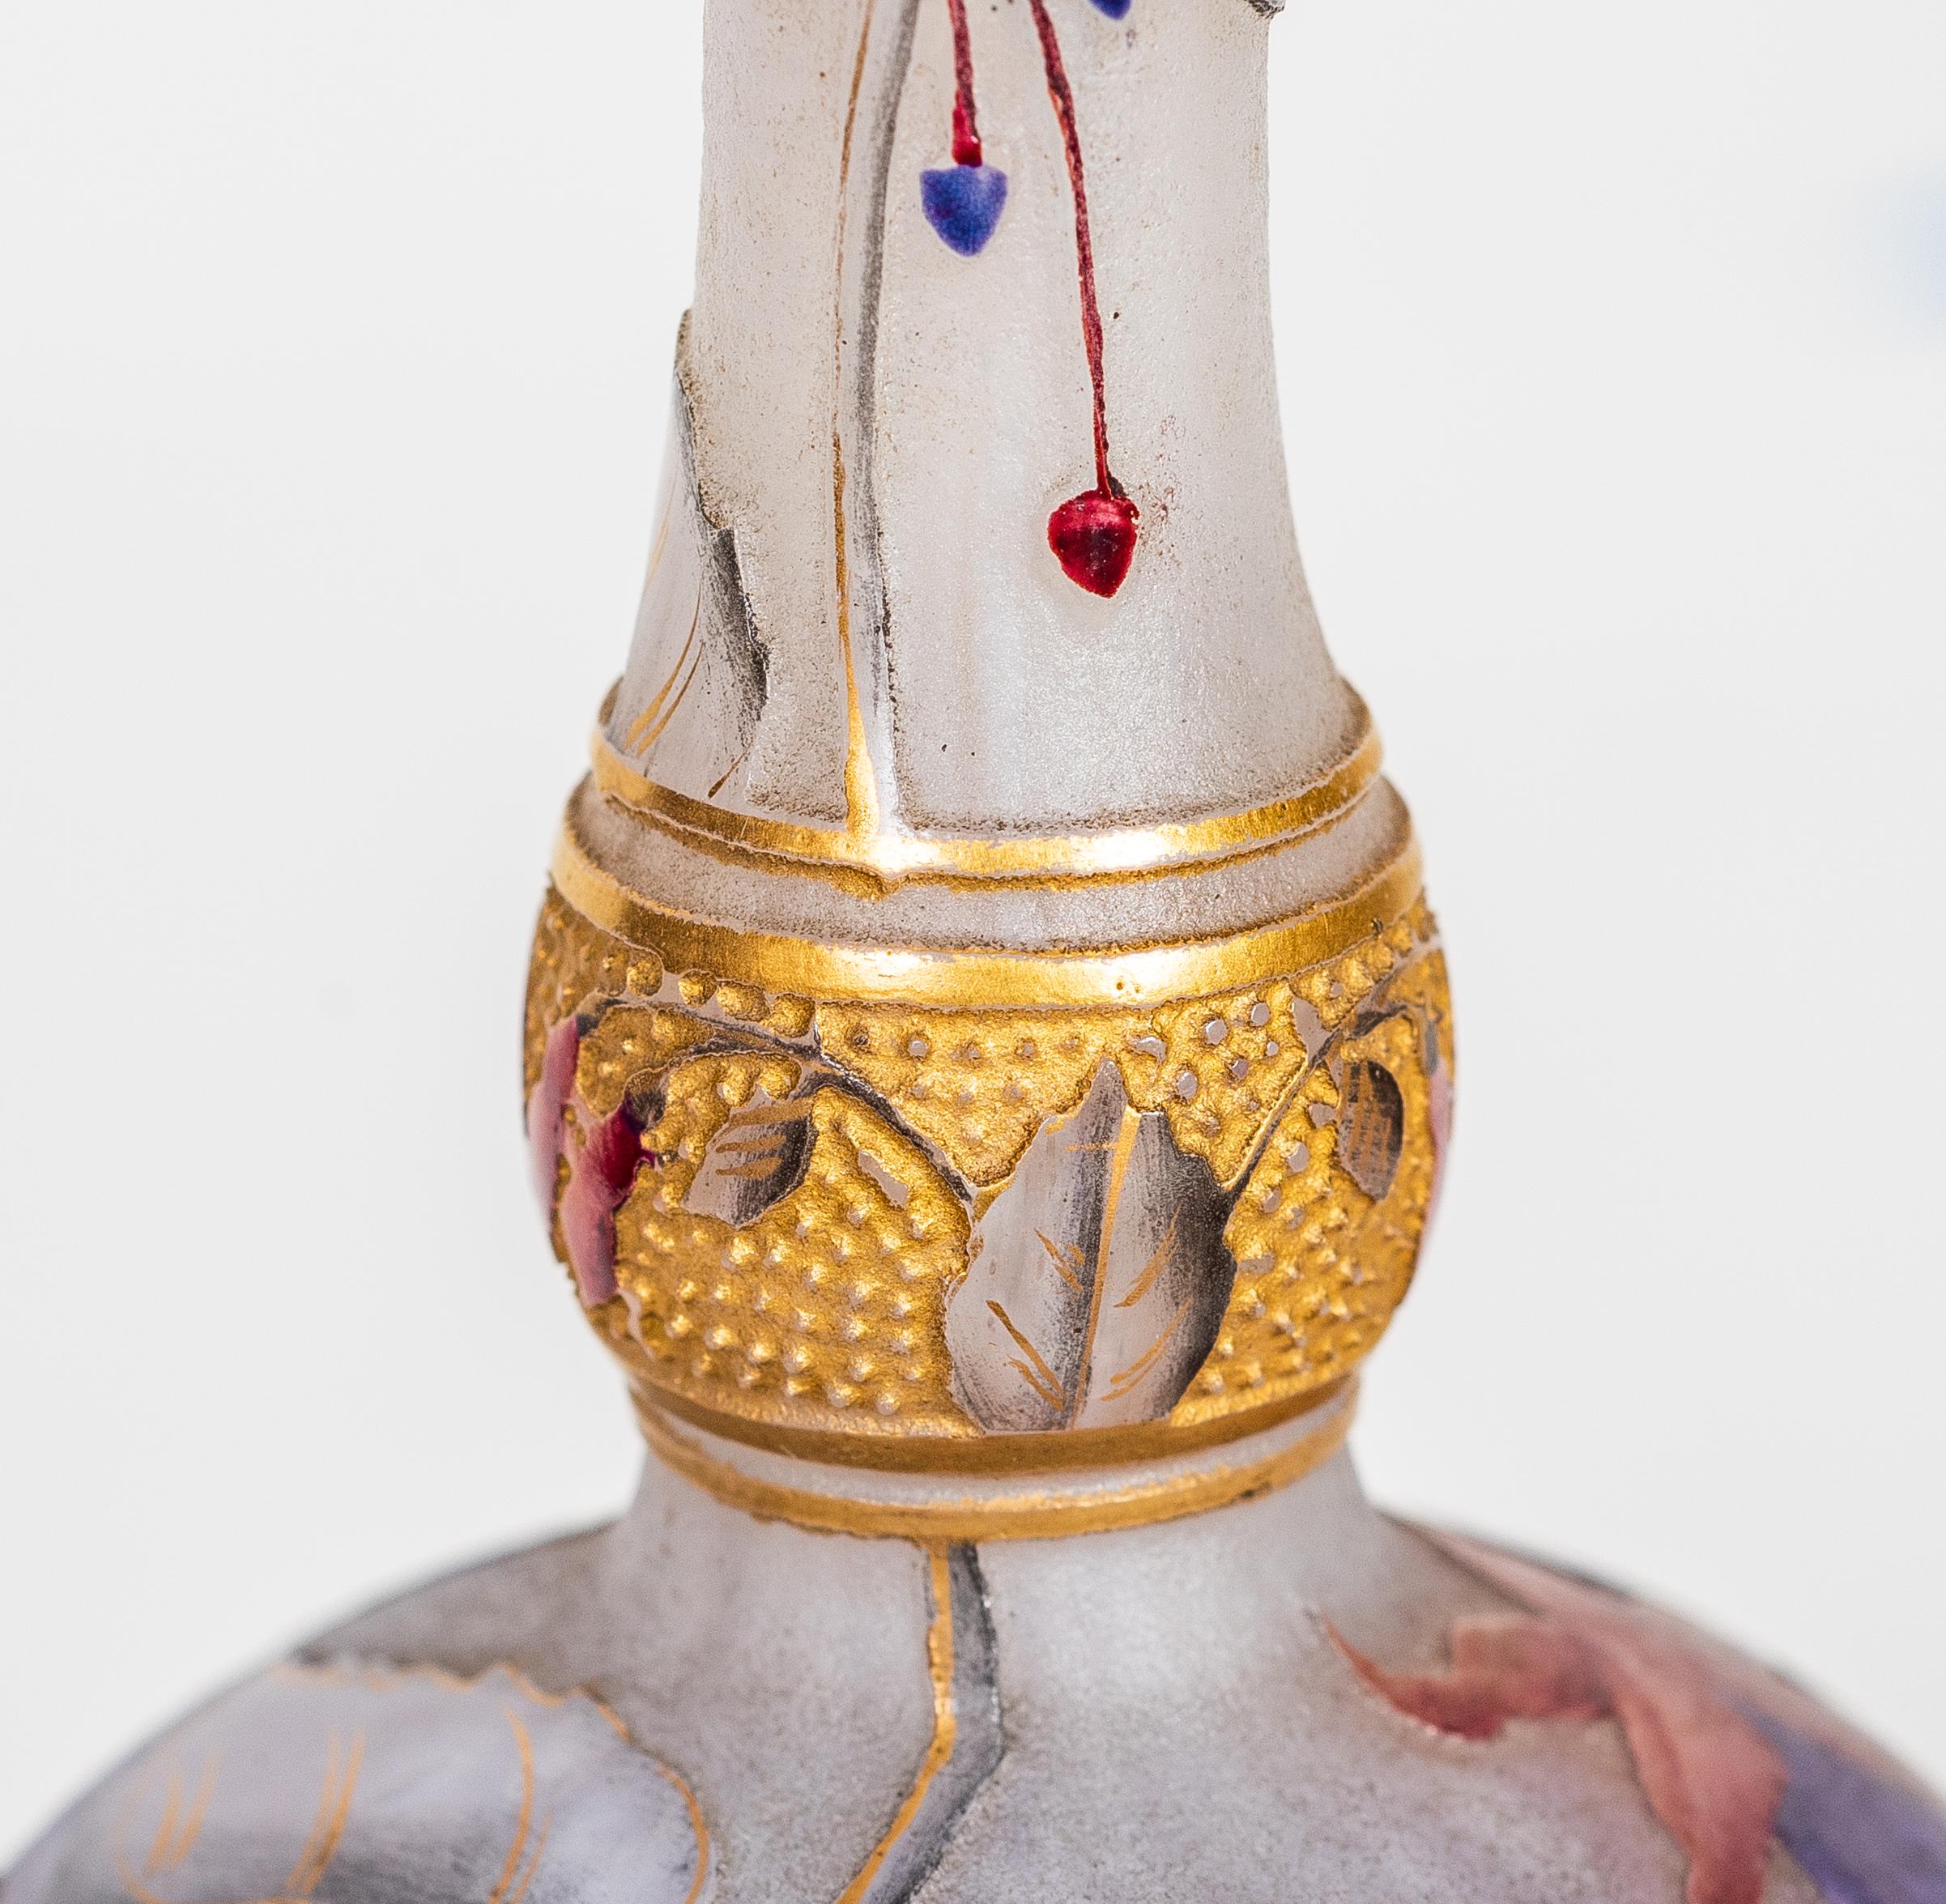 Daum Nancy Cameo and enamel glass vase,
France, circa 1900
decorated with gilt, red and purple flowers on an opalescent and purple ground
signed Daum Nancy with Cross of Lorraine
Dimensions
Height
5.59 in. (14.2 cm).